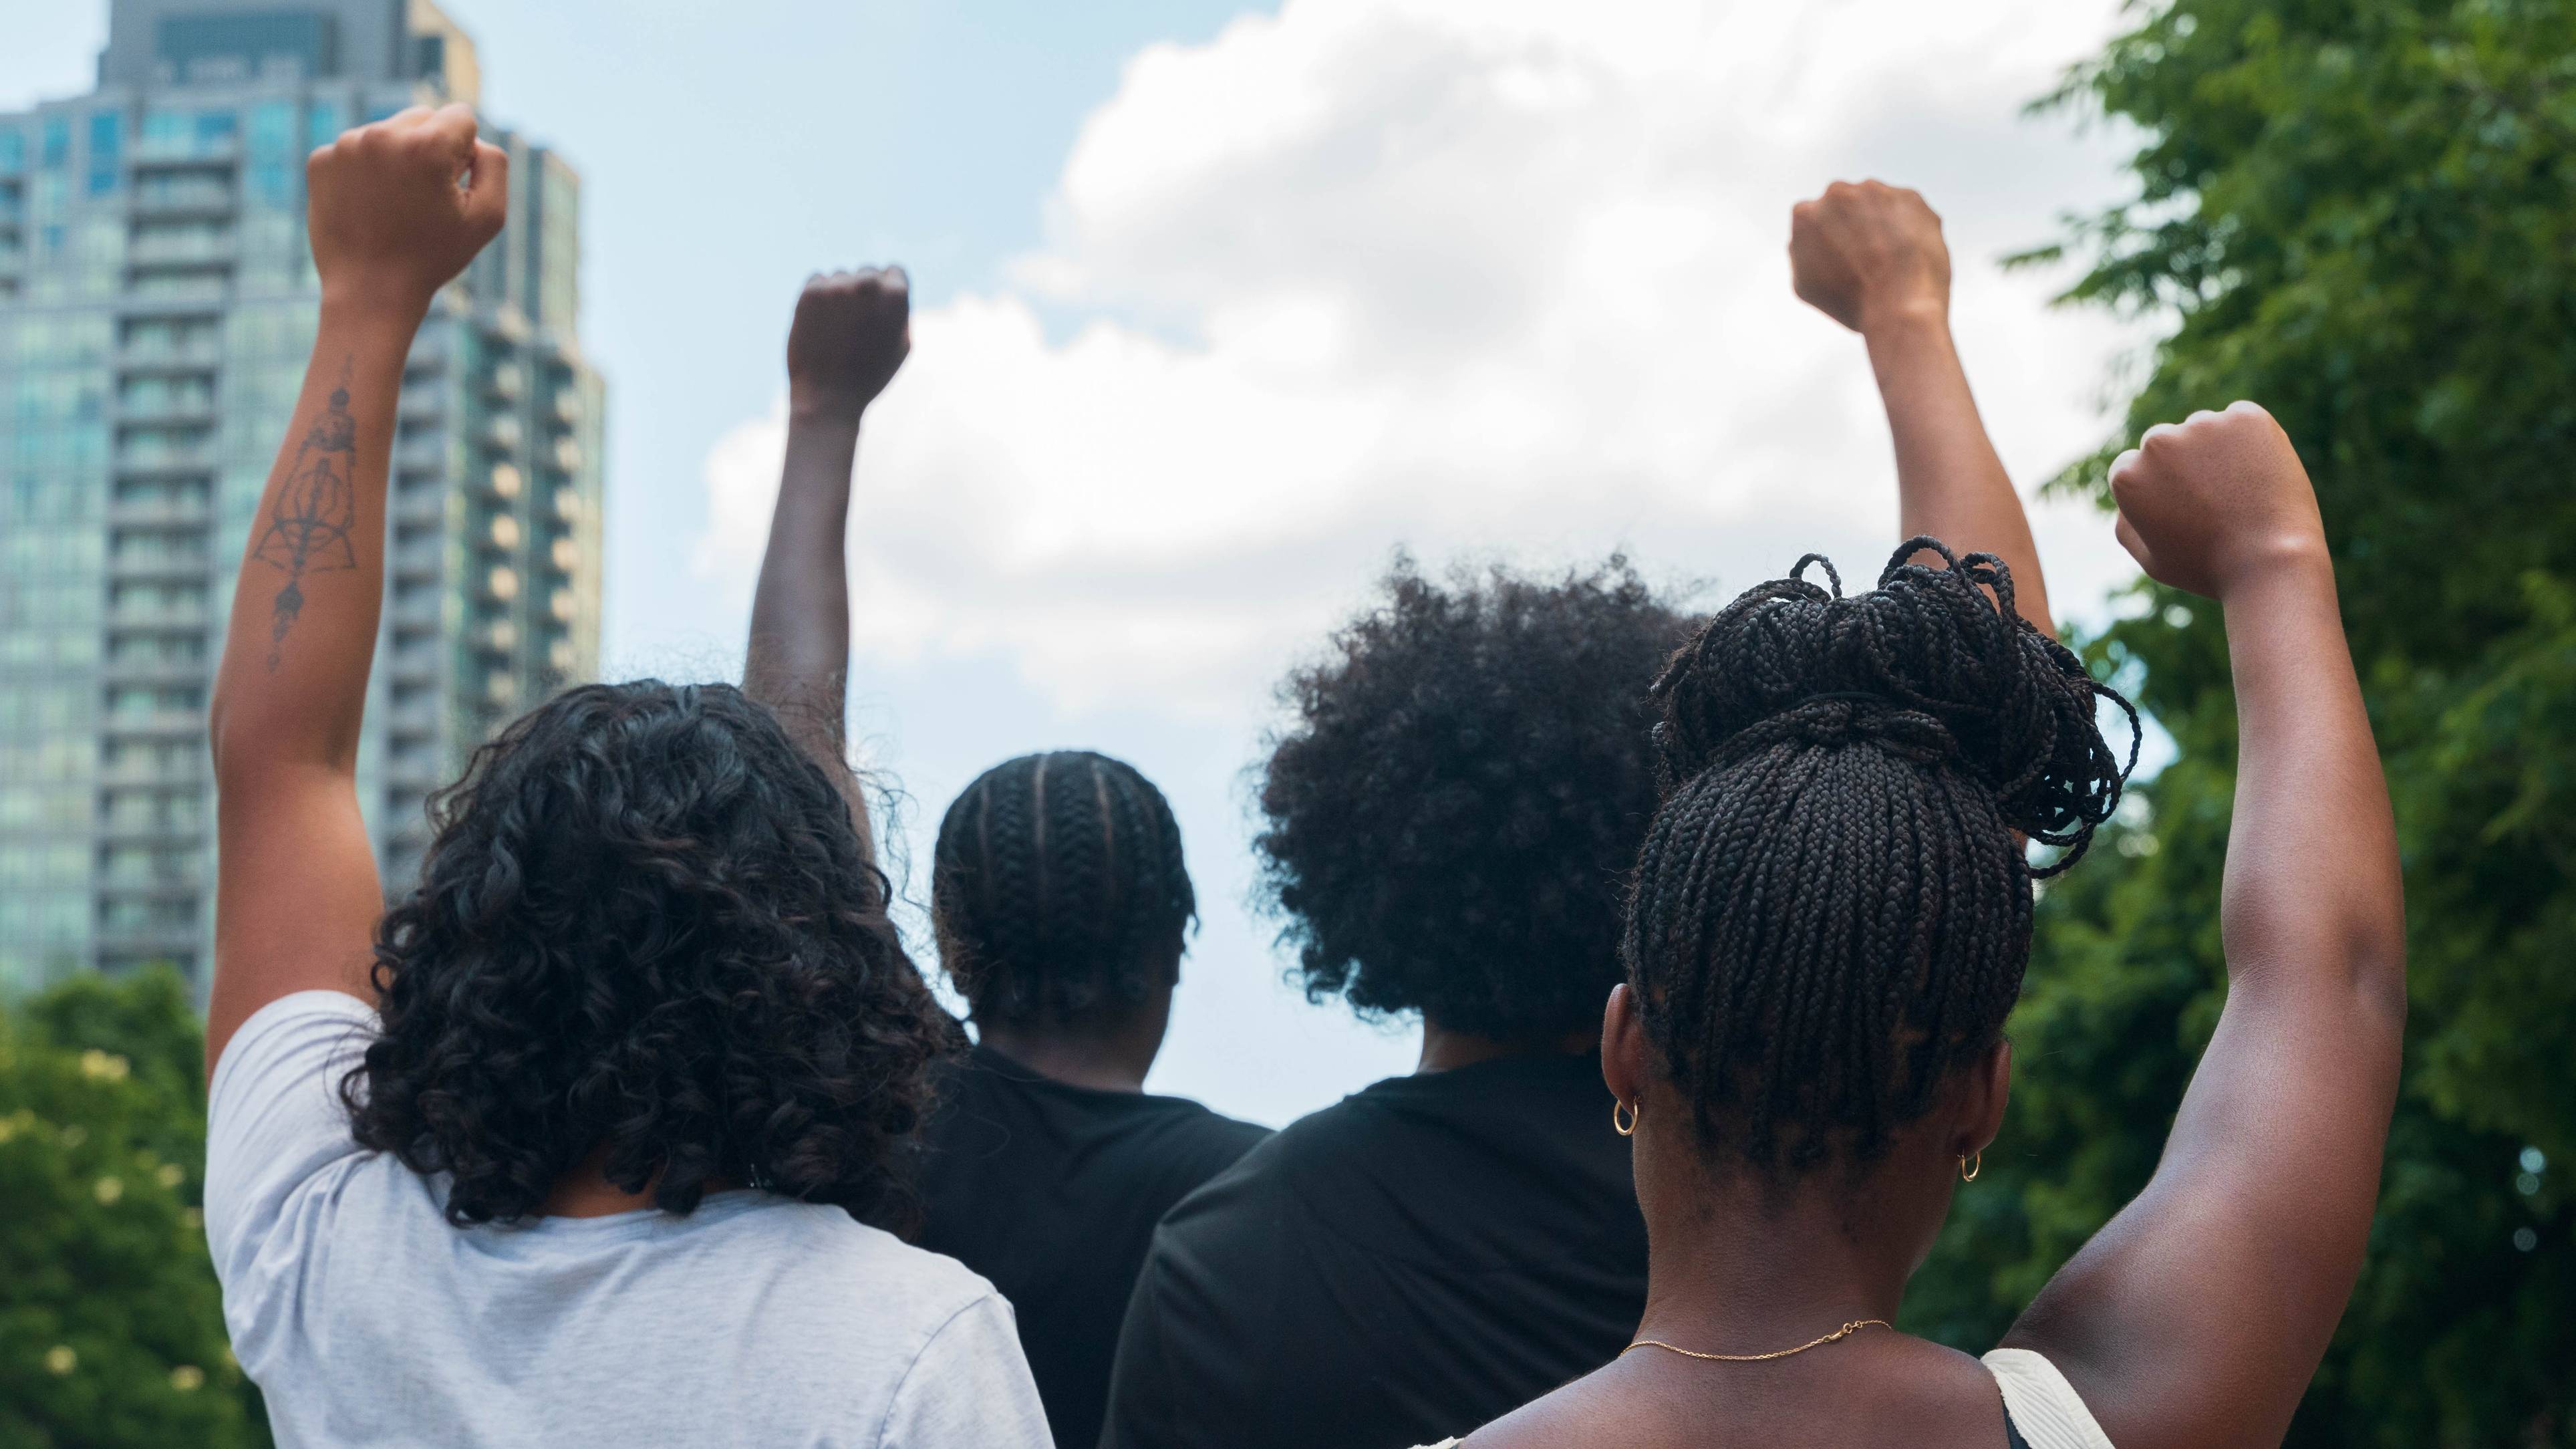 The Power of Grassroots Activism and Community Organizing